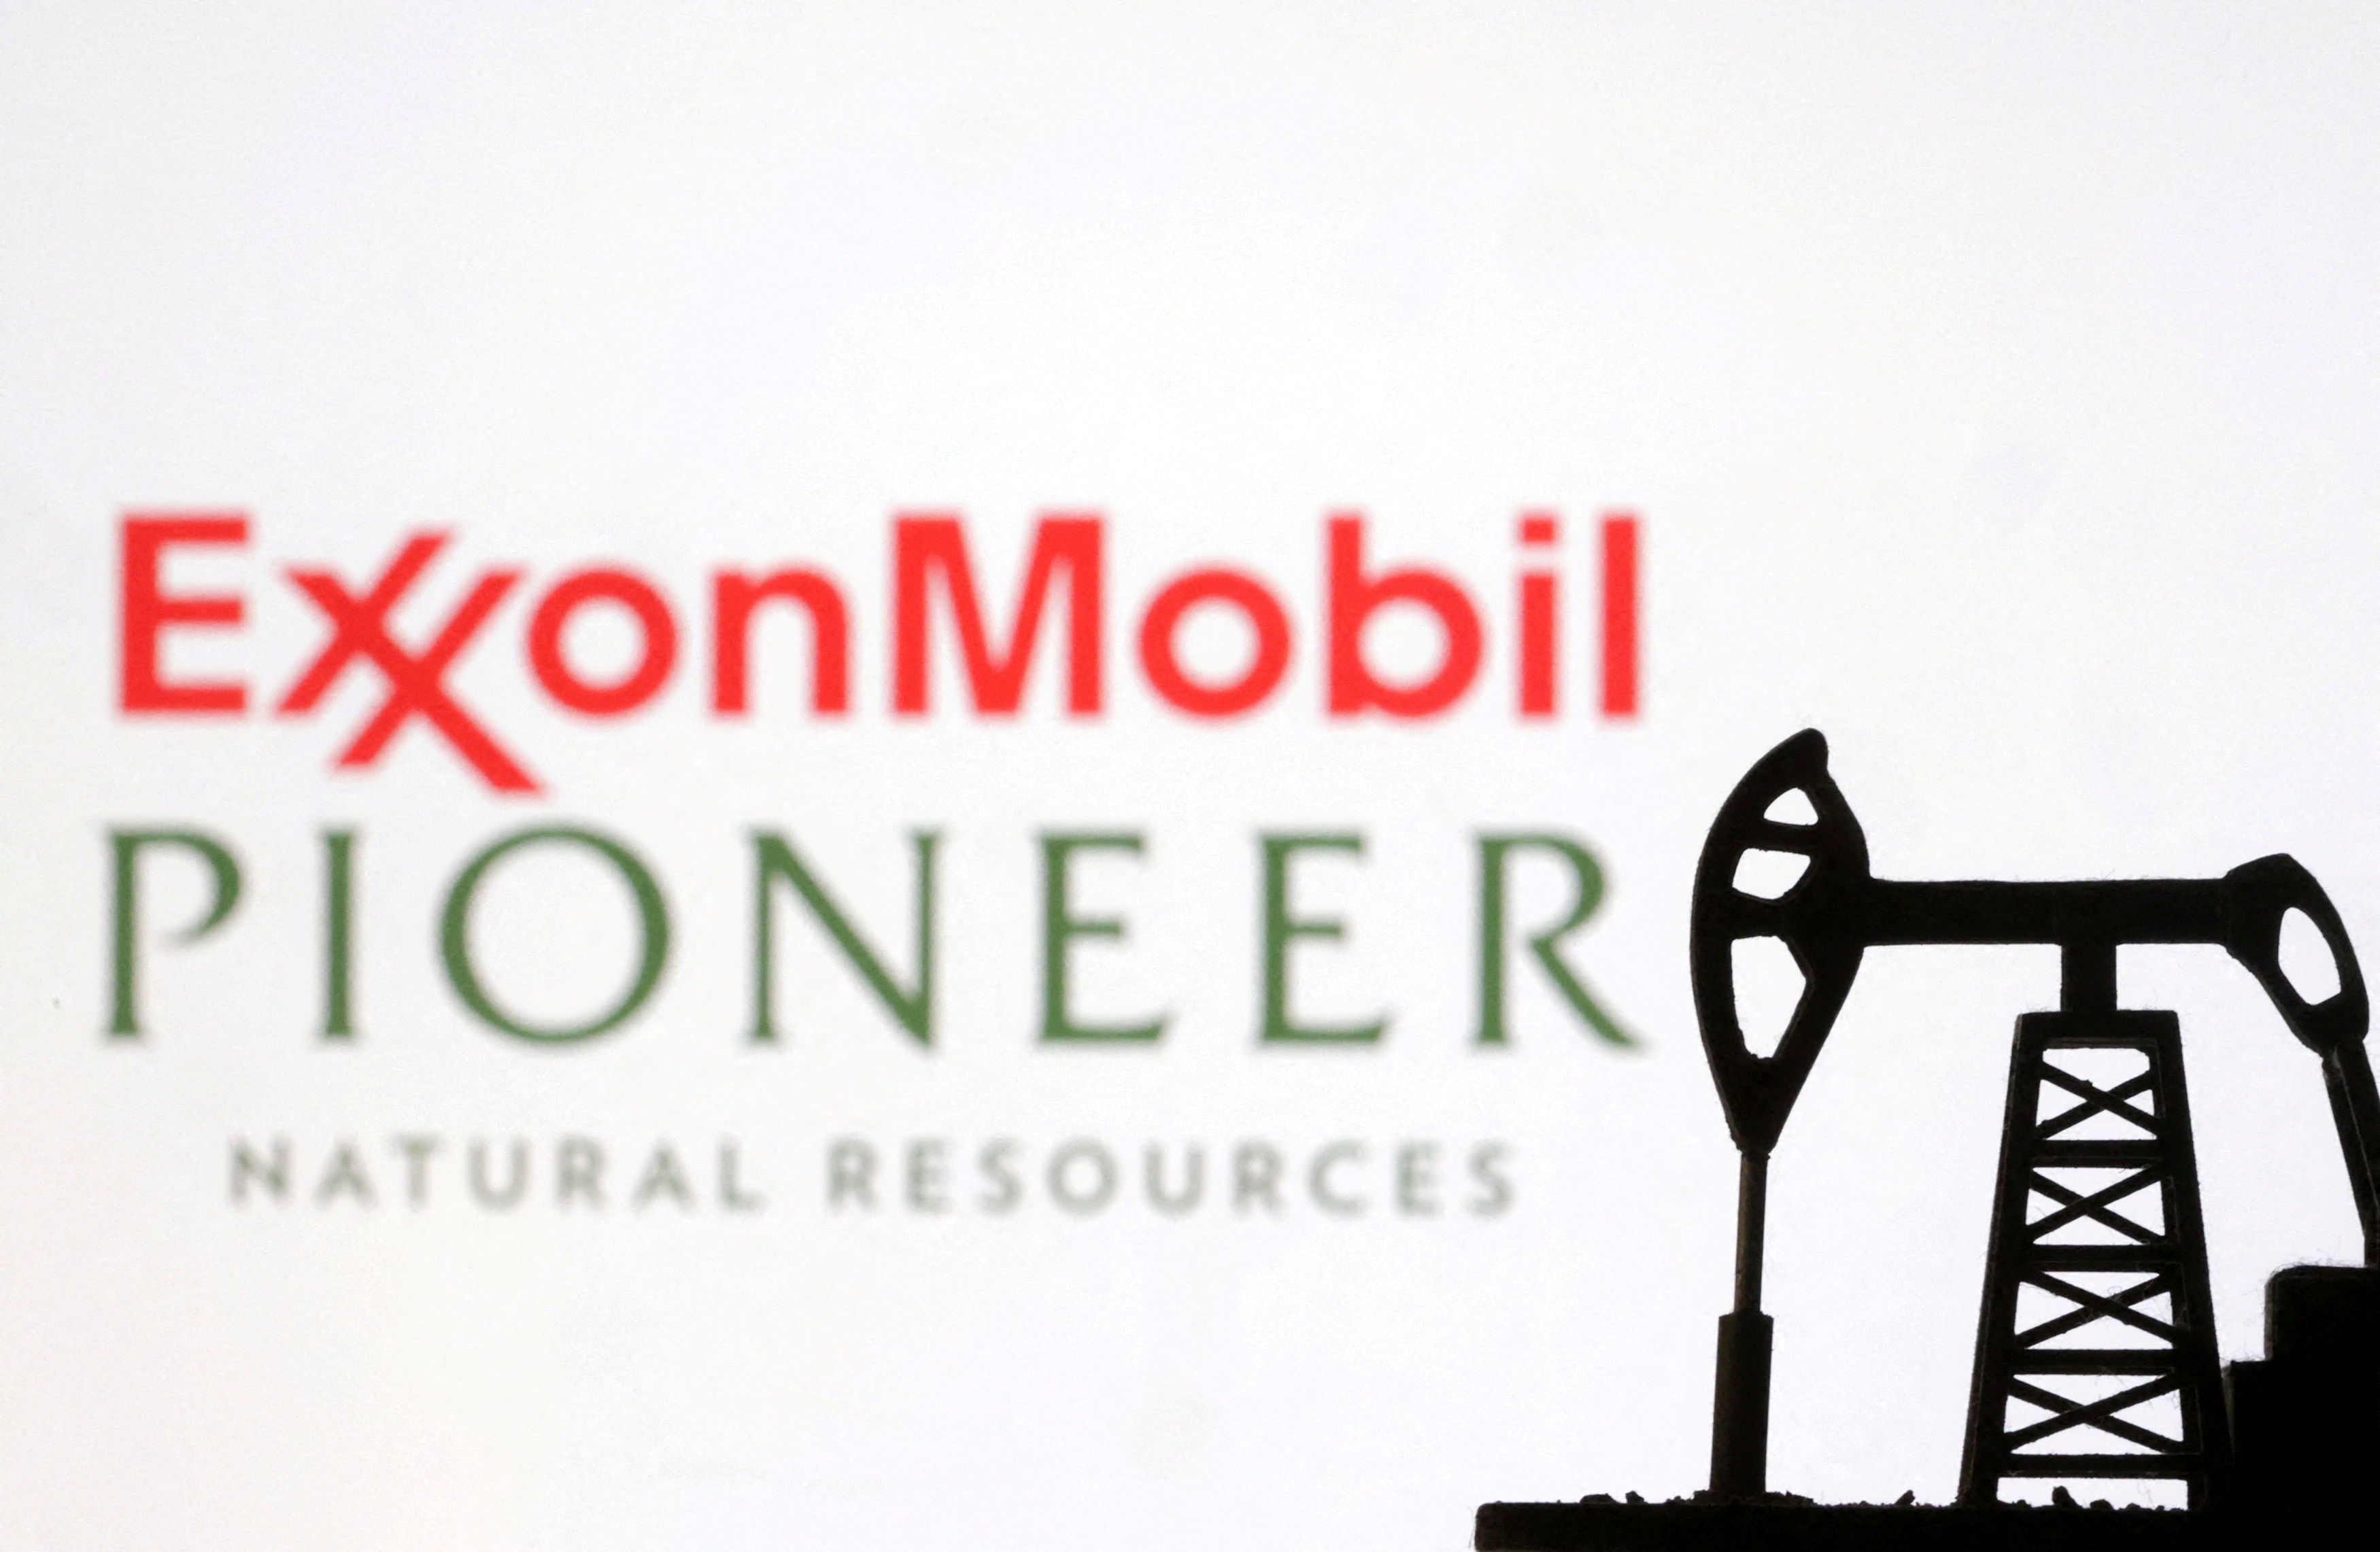 Illustration shows ExxonMobil and Pioneer Natural Resources logos